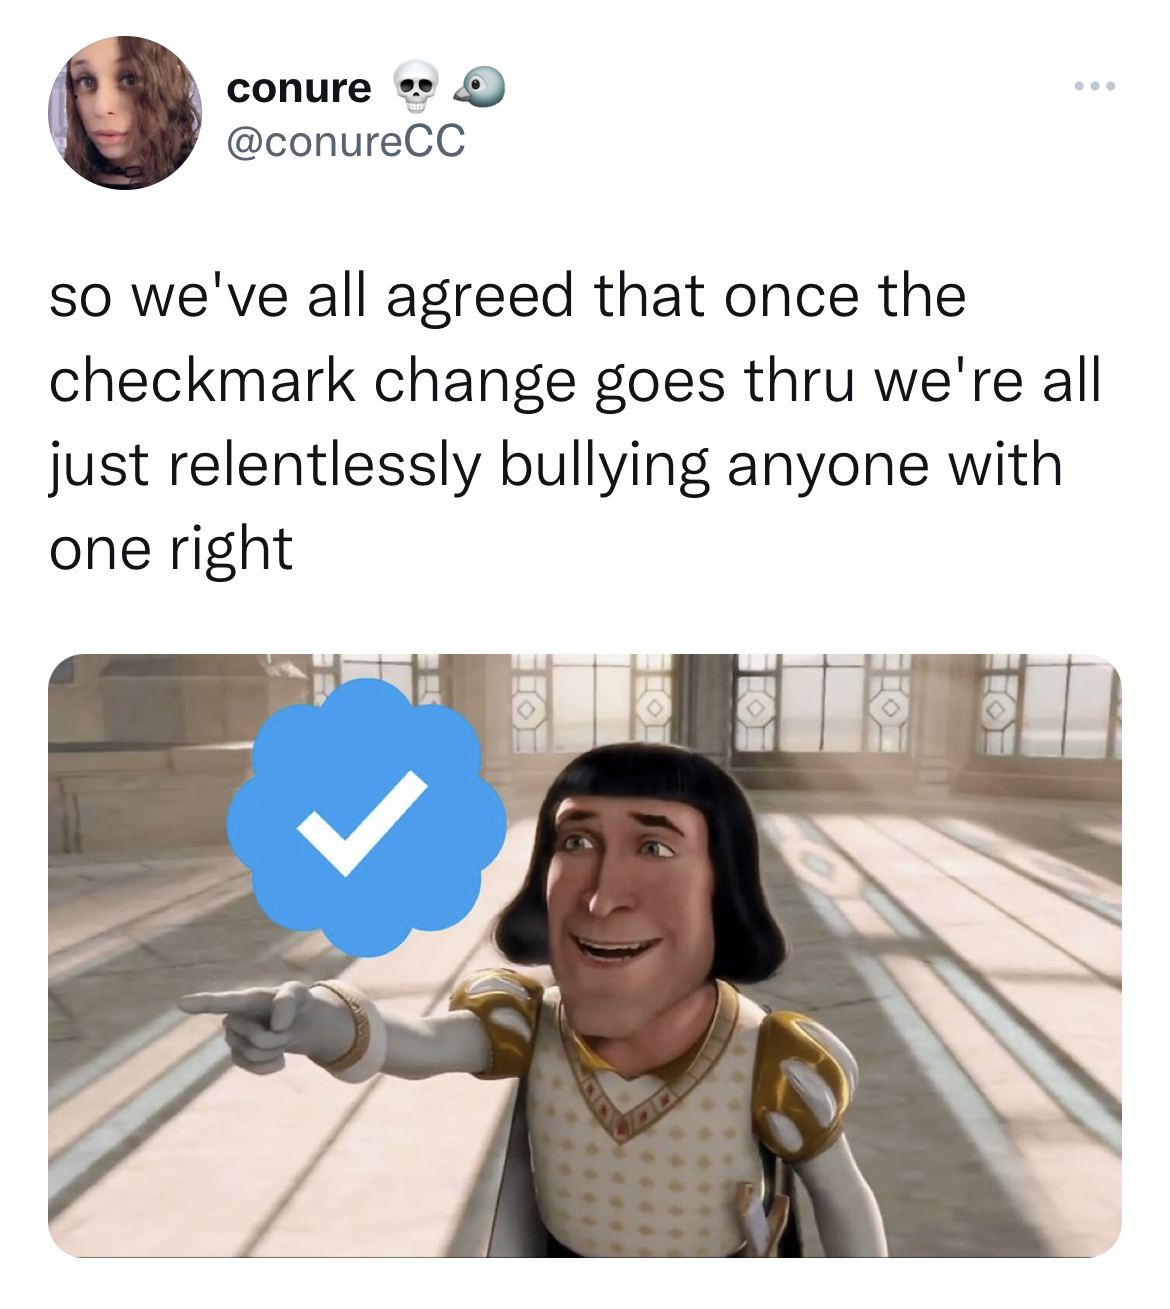 Celeb roasts of the week - human behavior - conure so we've all agreed that once the checkmark change goes thru we're all just relentlessly bullying anyone with one right